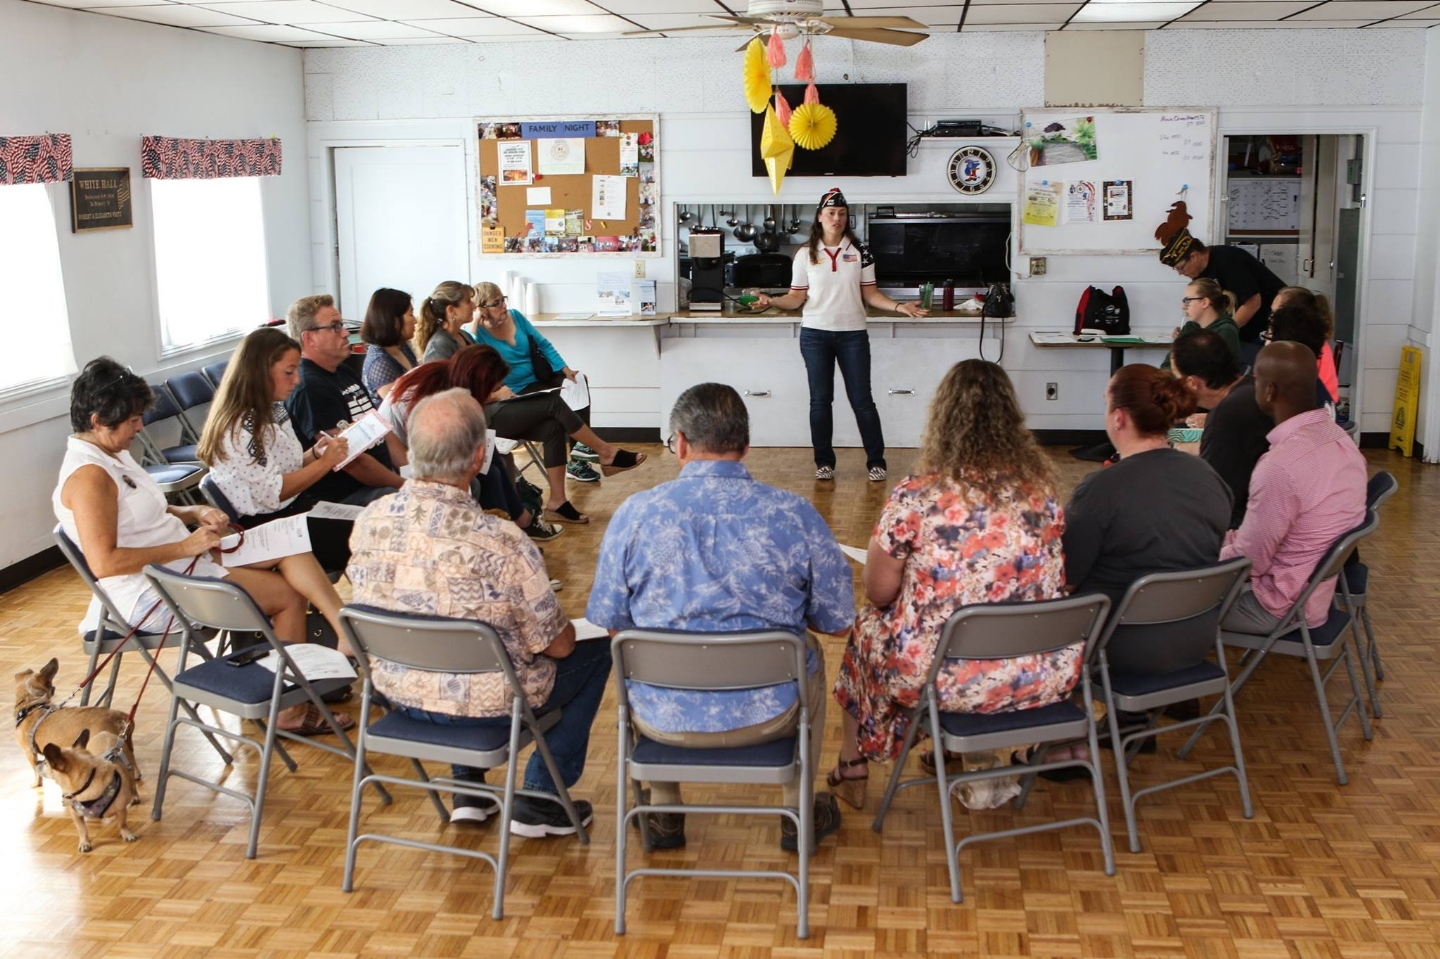 Comrade Miranda Williams discusses the five signs of suffering during Carter-Smith VFW Post 5867's Oct. 2017 Change Direction event. The event helps raise awareness in the community to stop the stigma of mental health issues.